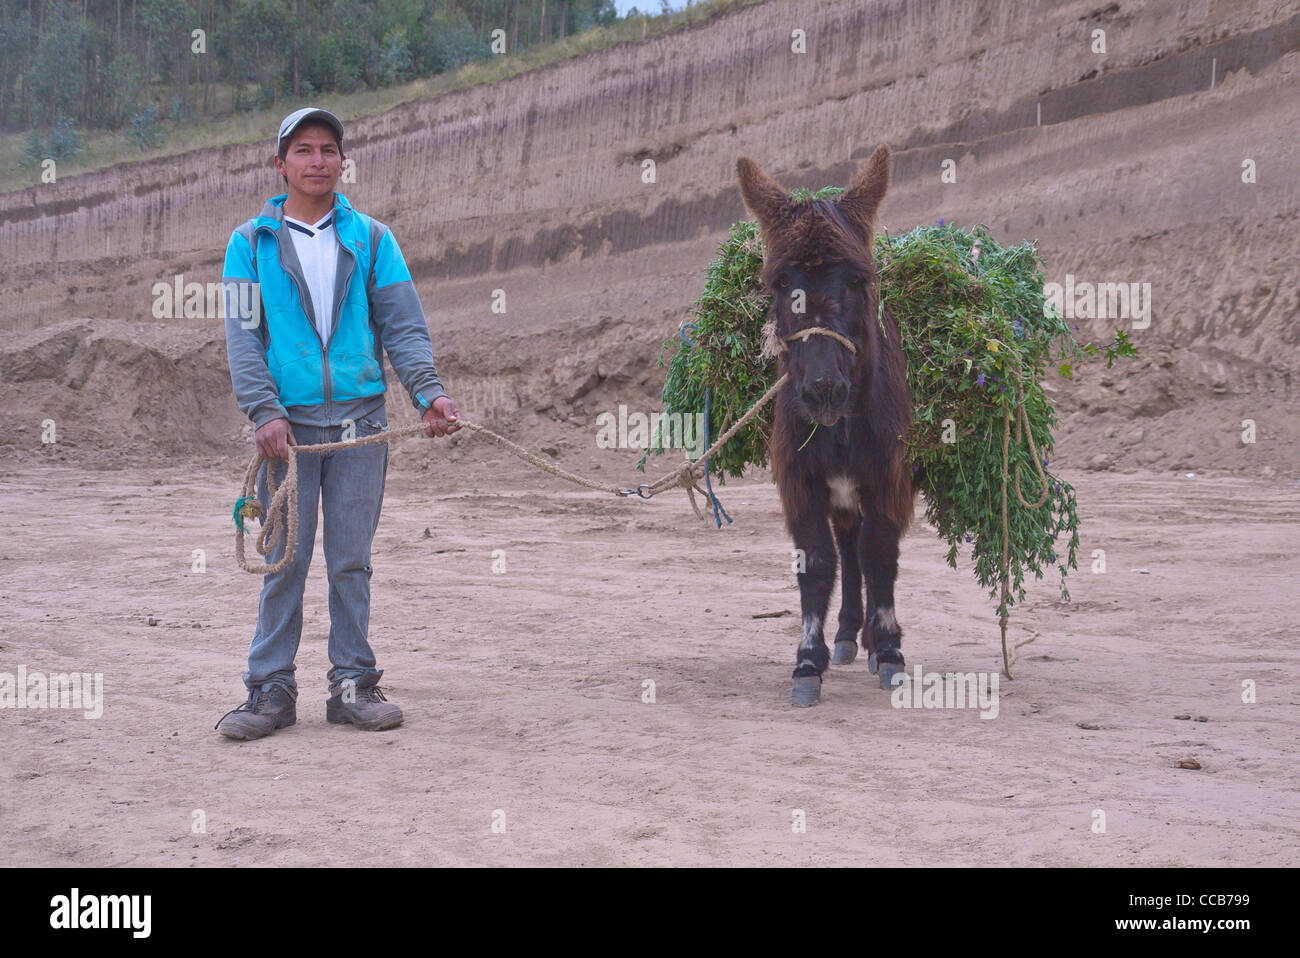 A twenty year old with his mules on the side of the road with a load of fresh cut grain for animals. Stock Photo